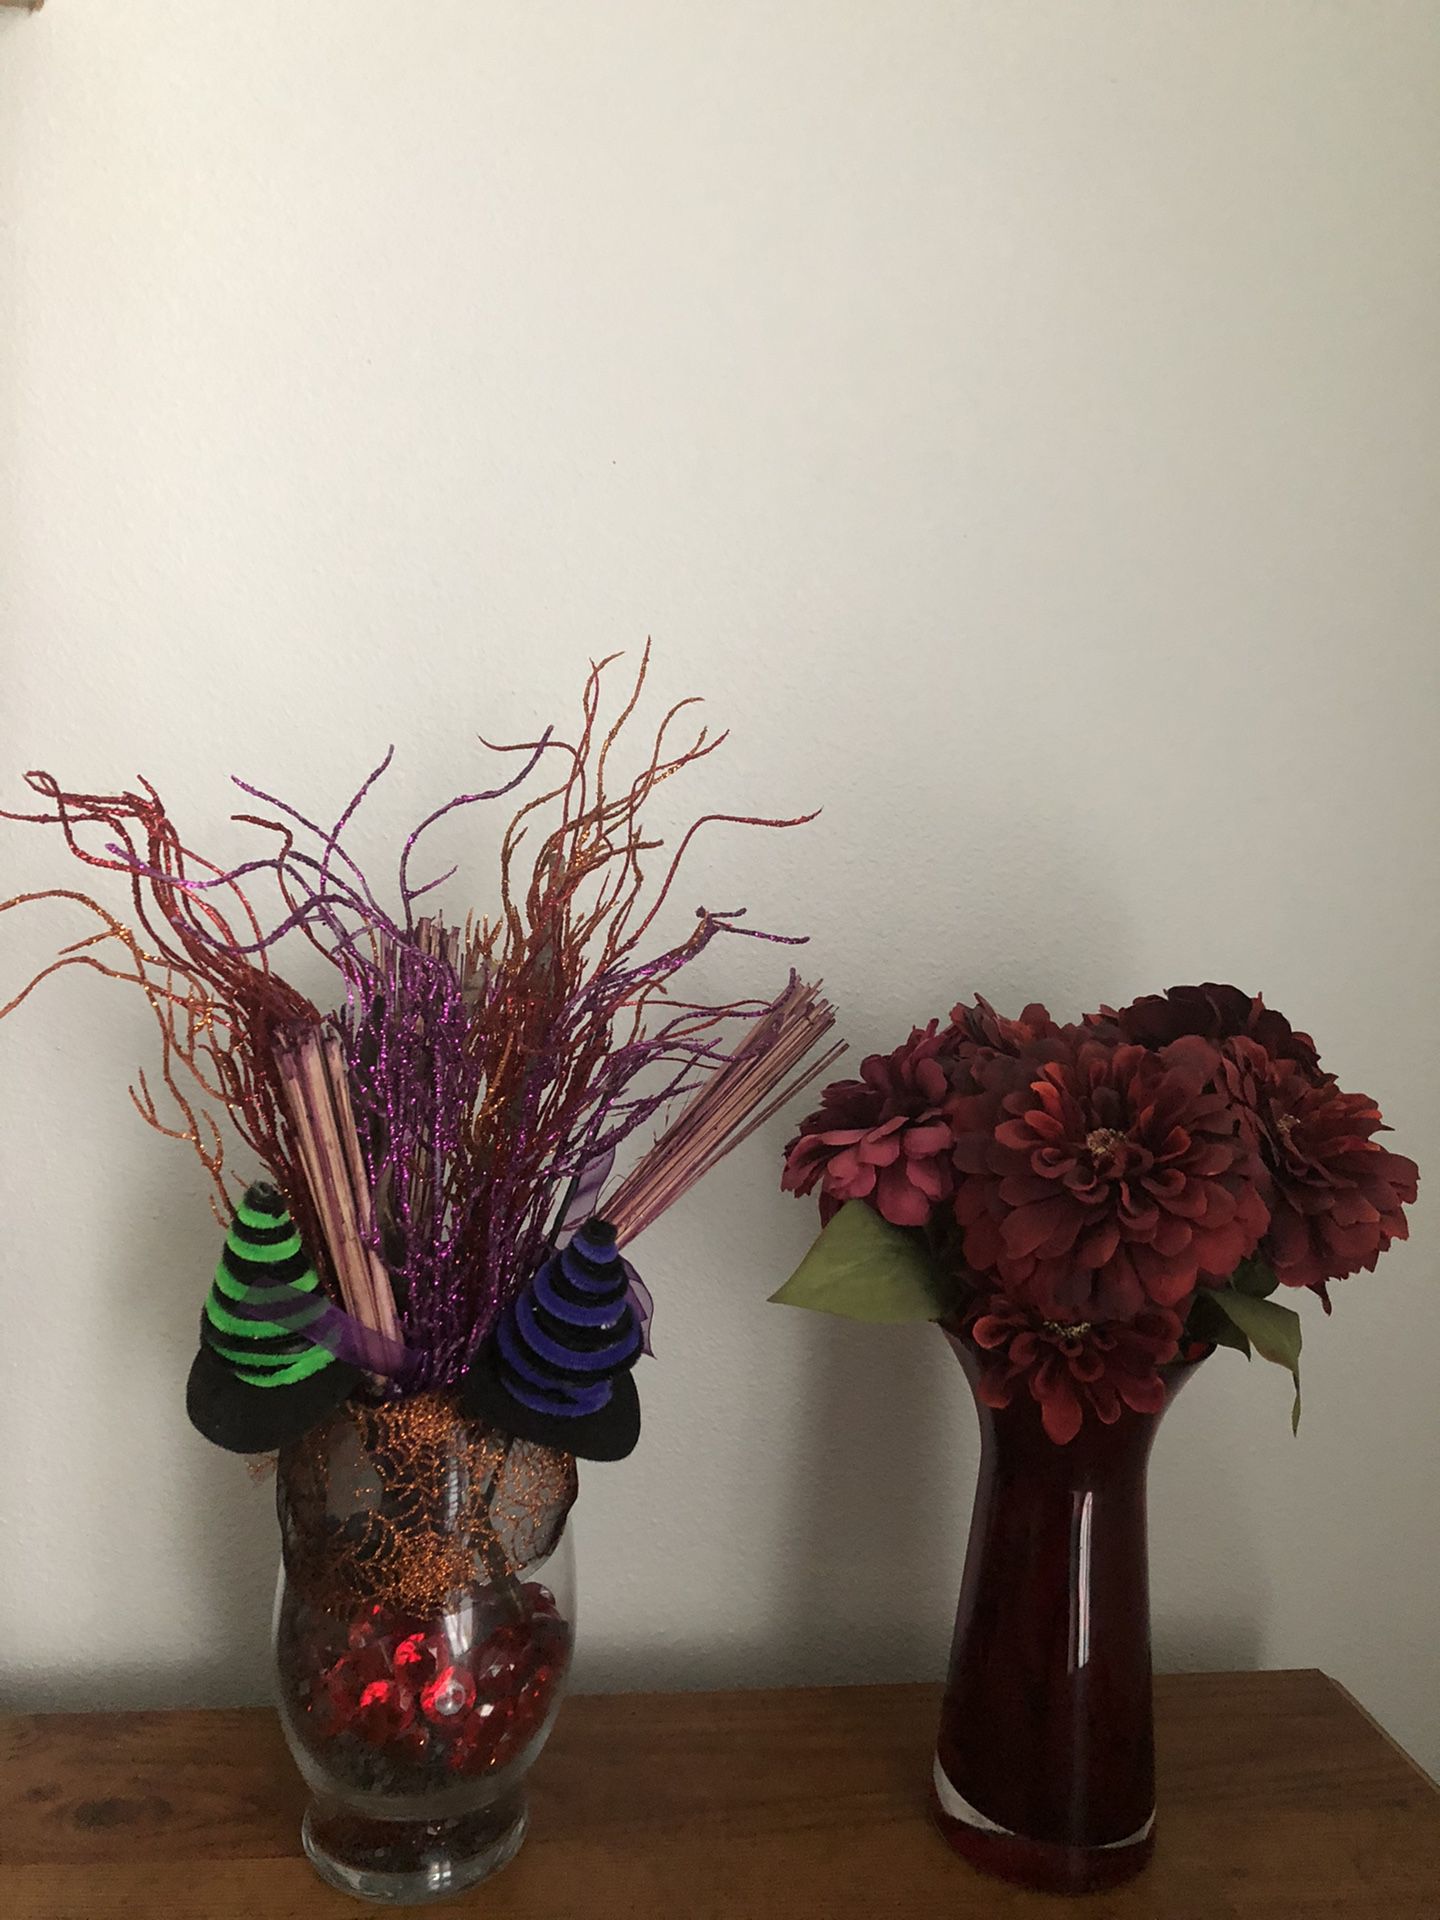 home decor candlestick and vases with flowers, prices from $5-20